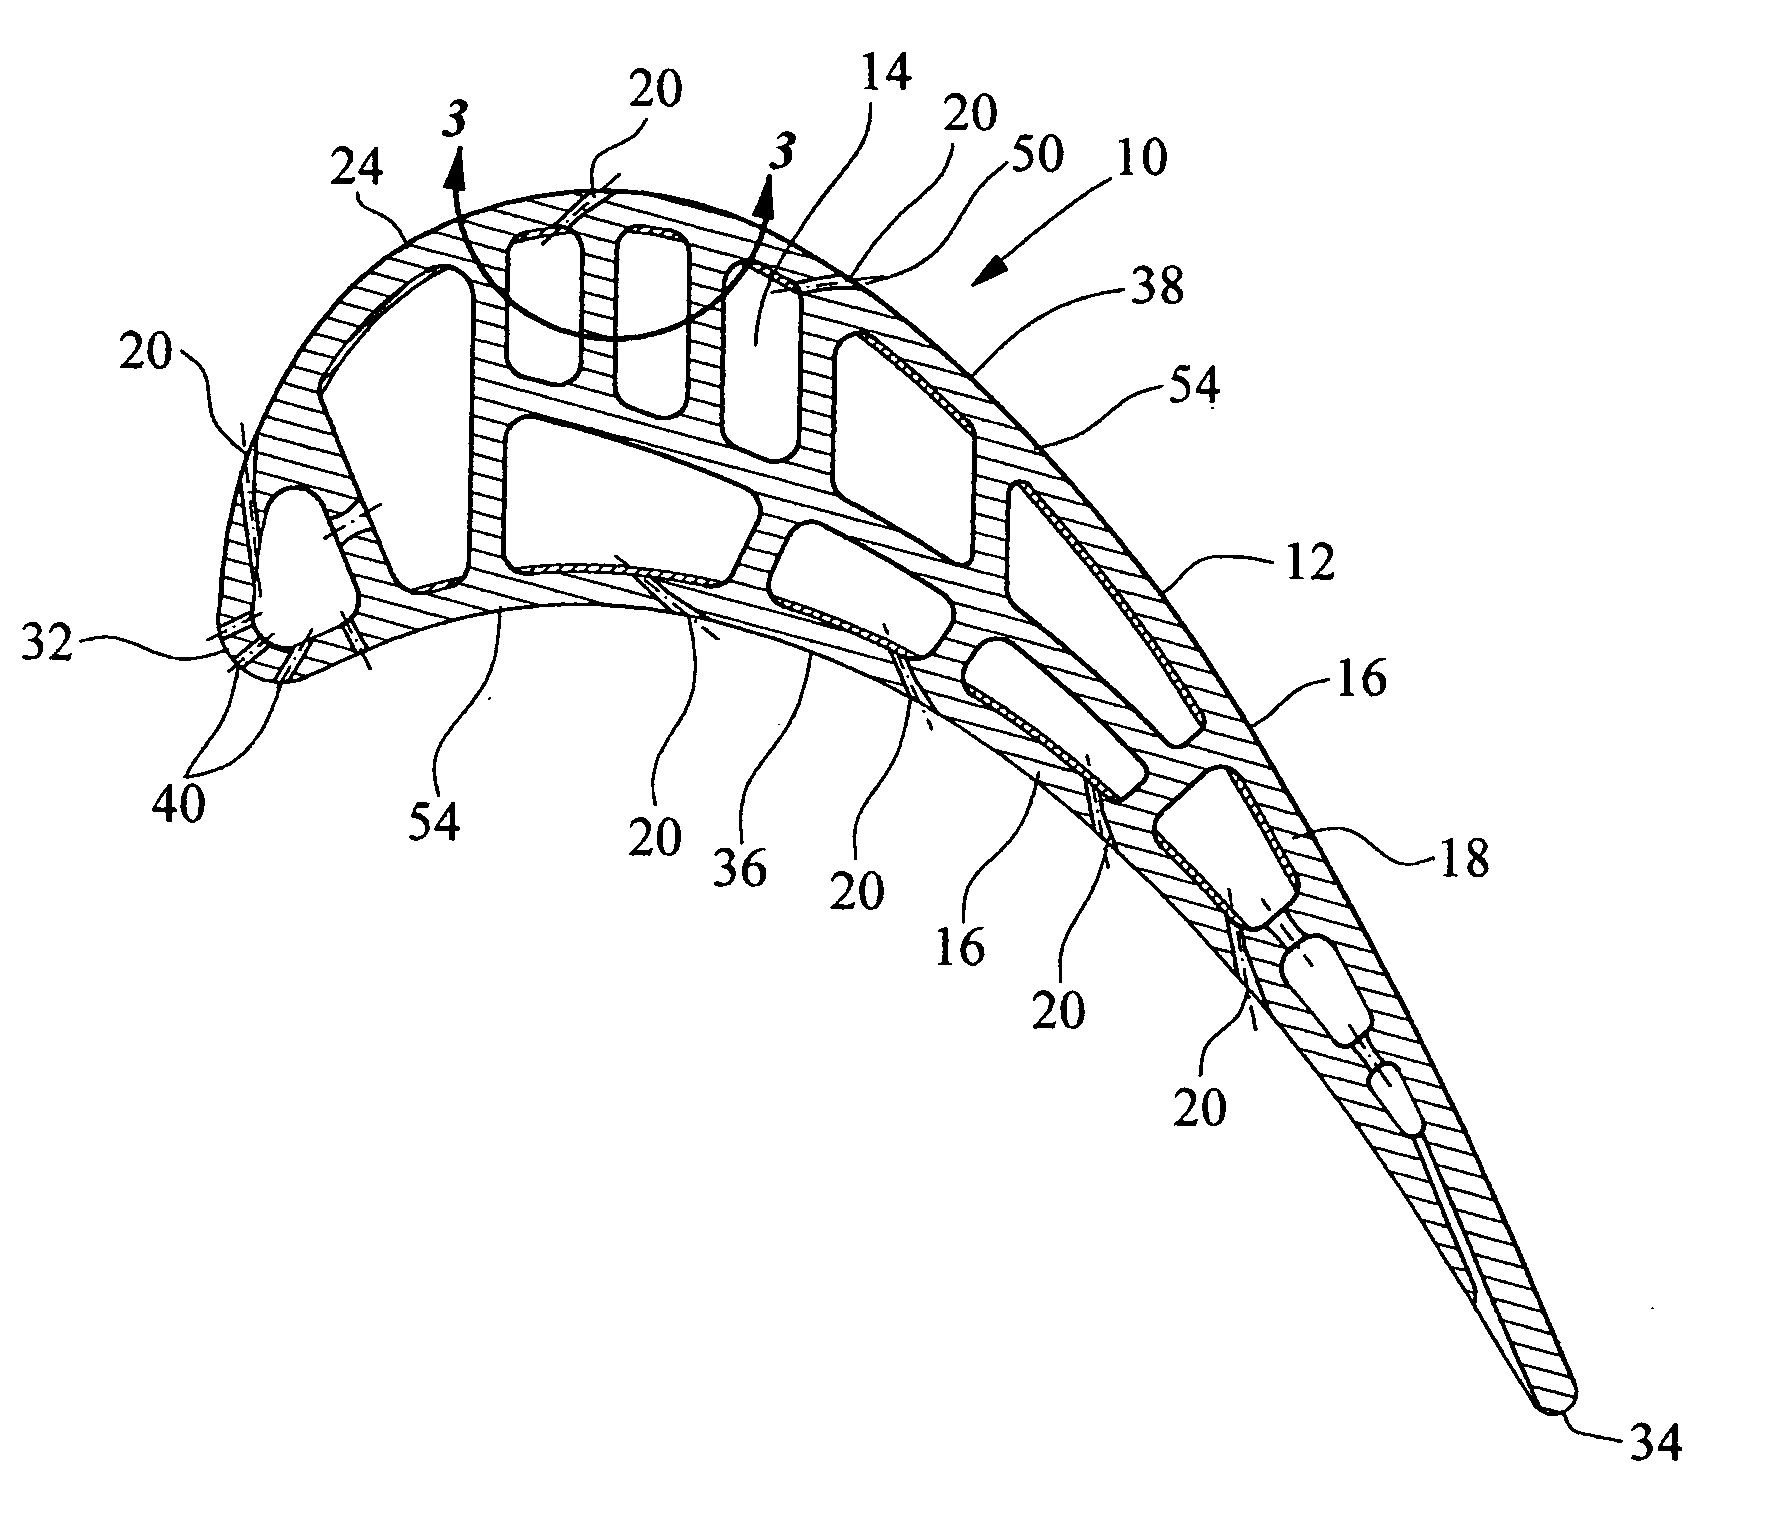 Turbine airfoil cooling system with elbowed, diffusion film cooling hole